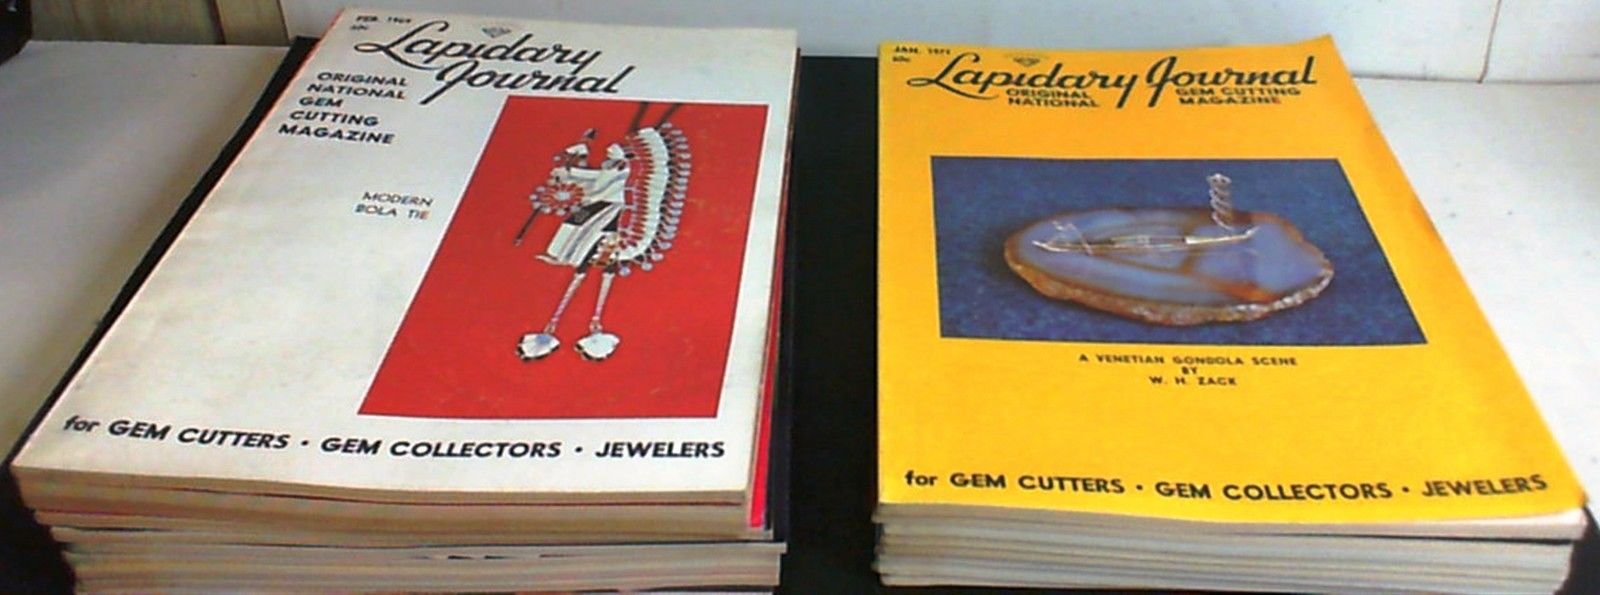 17 Lapidary Journal Magazines from 1969 & 1971 in good condition